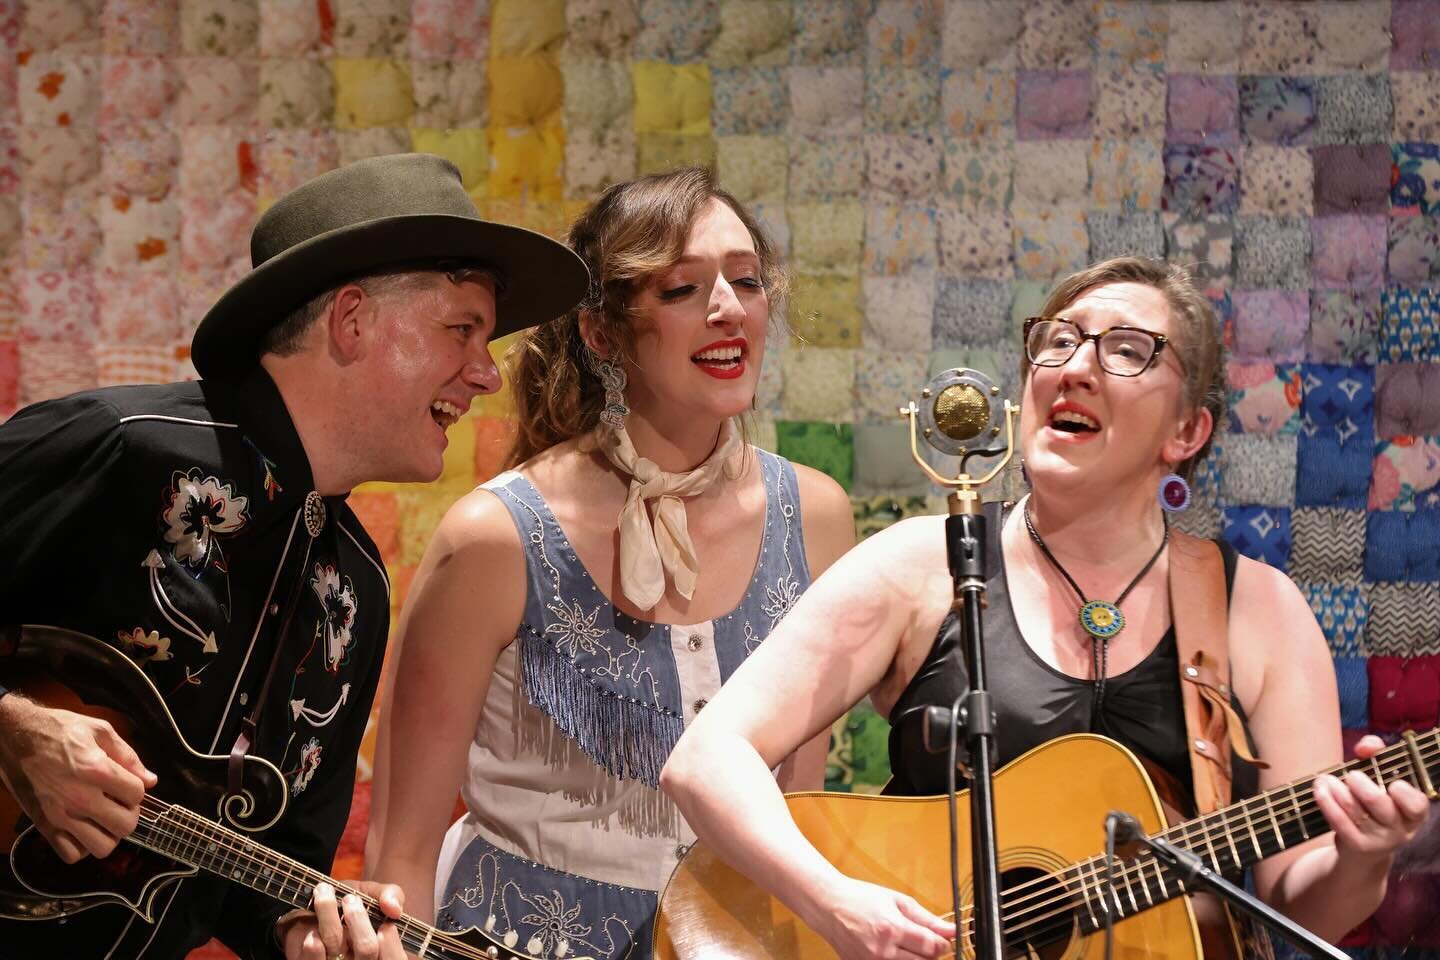 Singing the sad songs with our bud, @taylordallasv at the @muskegcollective Cowboy Ball last fall. Bringing the Cowboy Ball to Sitka next week and can&rsquo;t wait to break some hearts! 💗💔💗💔💗

📸: Ben Hohenstatt